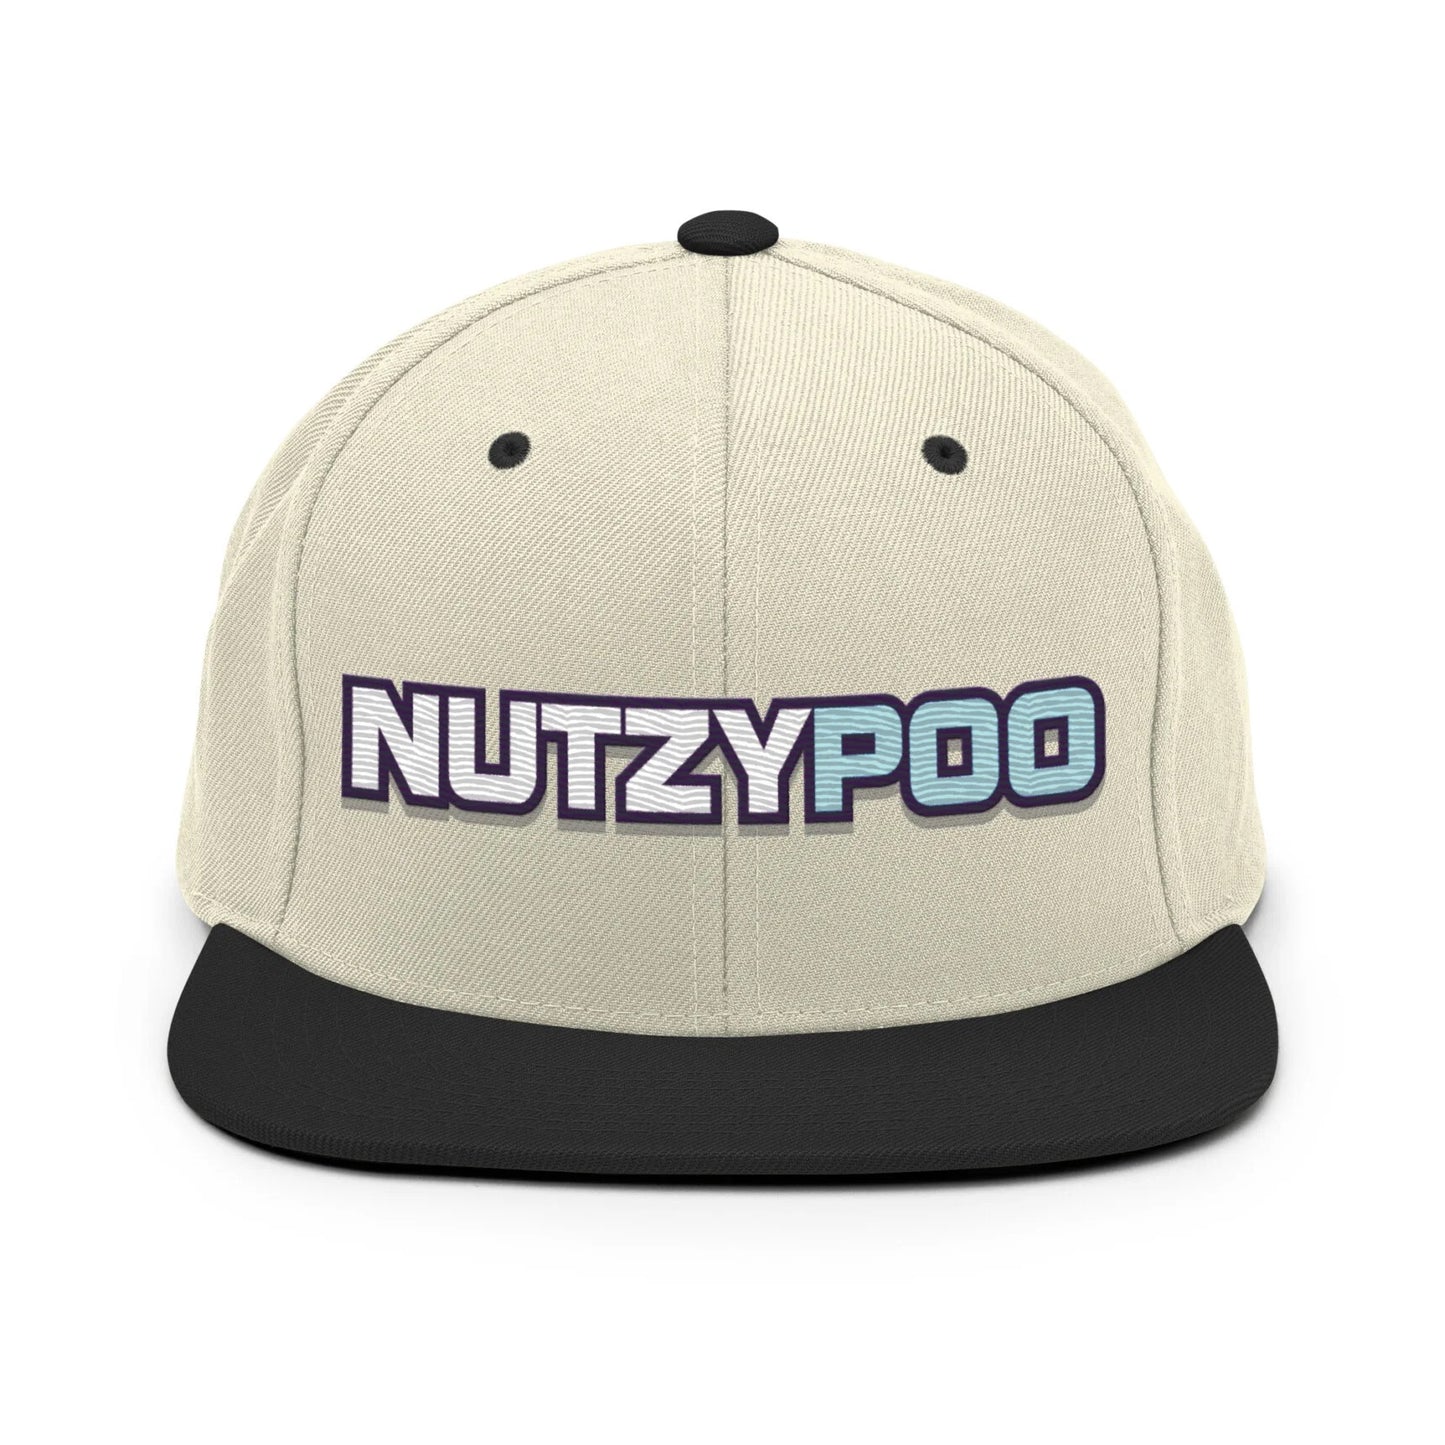 NutzyPoo ShowZone hat in natural white with black brim and accents